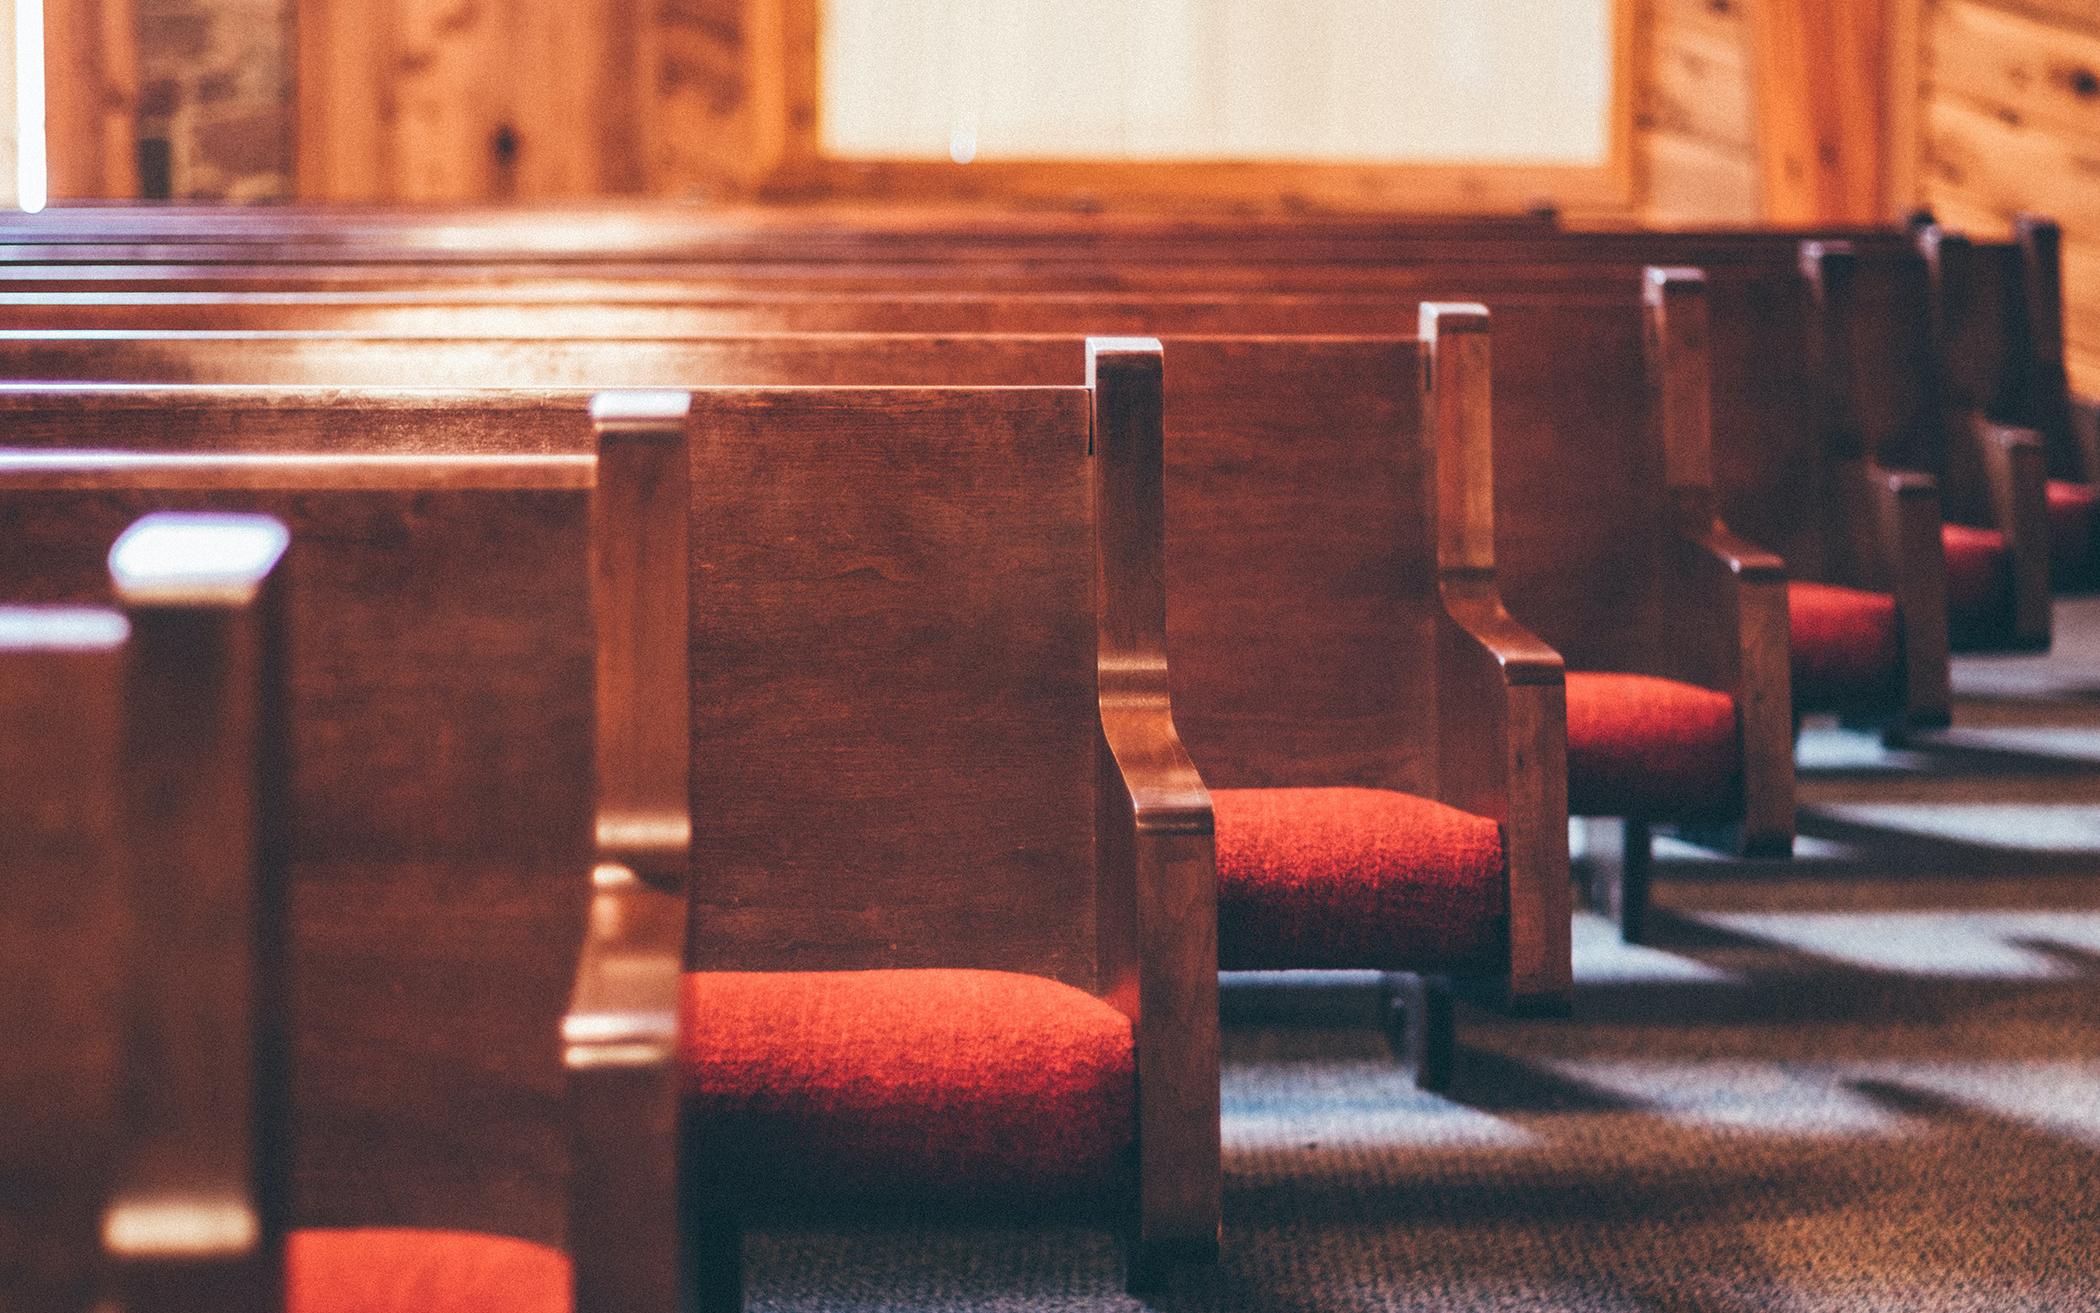 Gallup: Fewer Than Half of Americans Belong to a Church or Other House of Worship